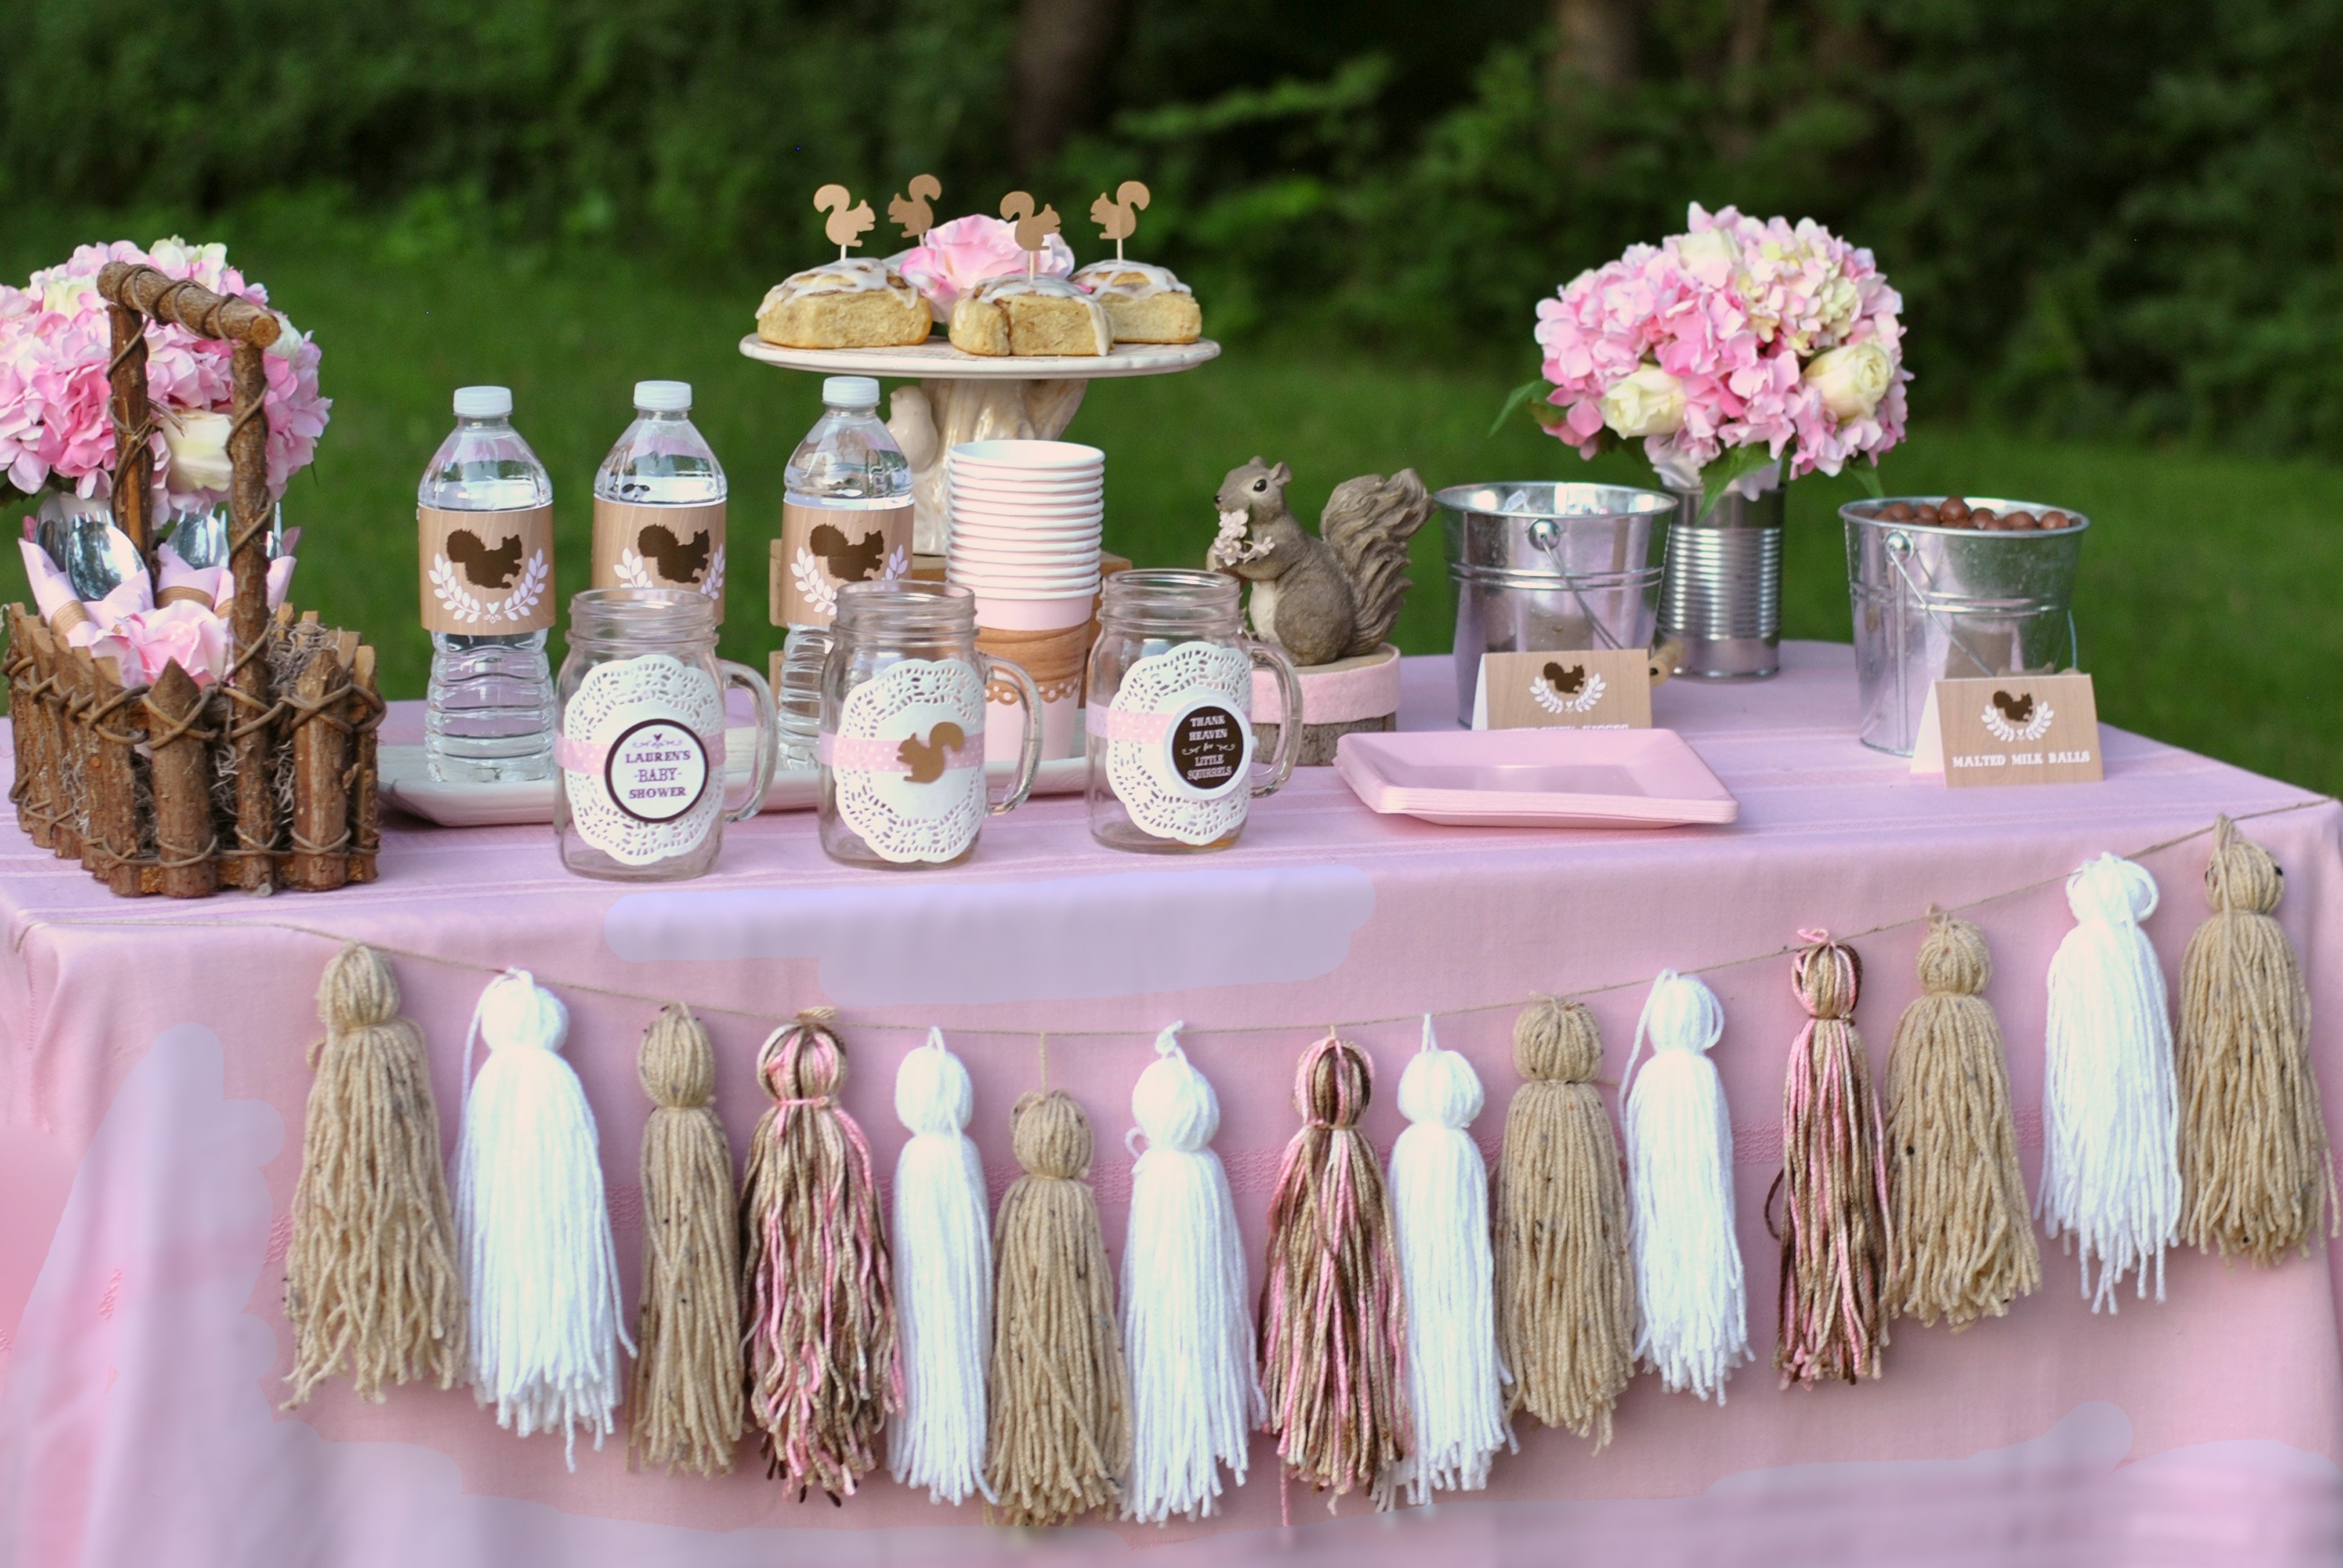 10 Gorgeous Baby Shower Centerpieces For Girl Ideas baby shower theme ideas for girl baby shower ideas gallery 3 2022